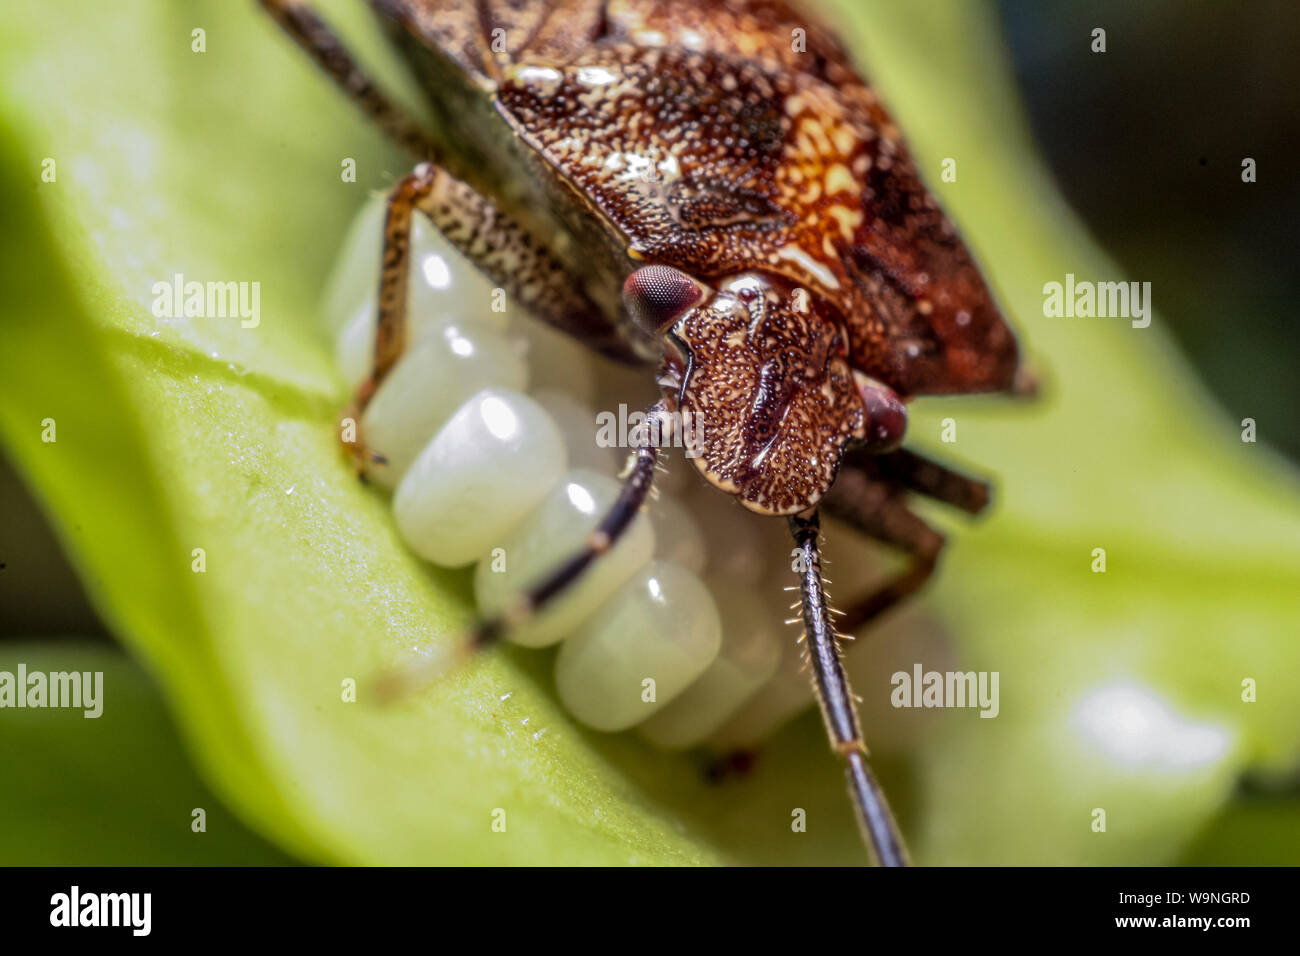 Shield bug protecting it's eggs showing parental care, considered a garden pest, insect on a leaf from a tropical garden in Brazil Stock Photo